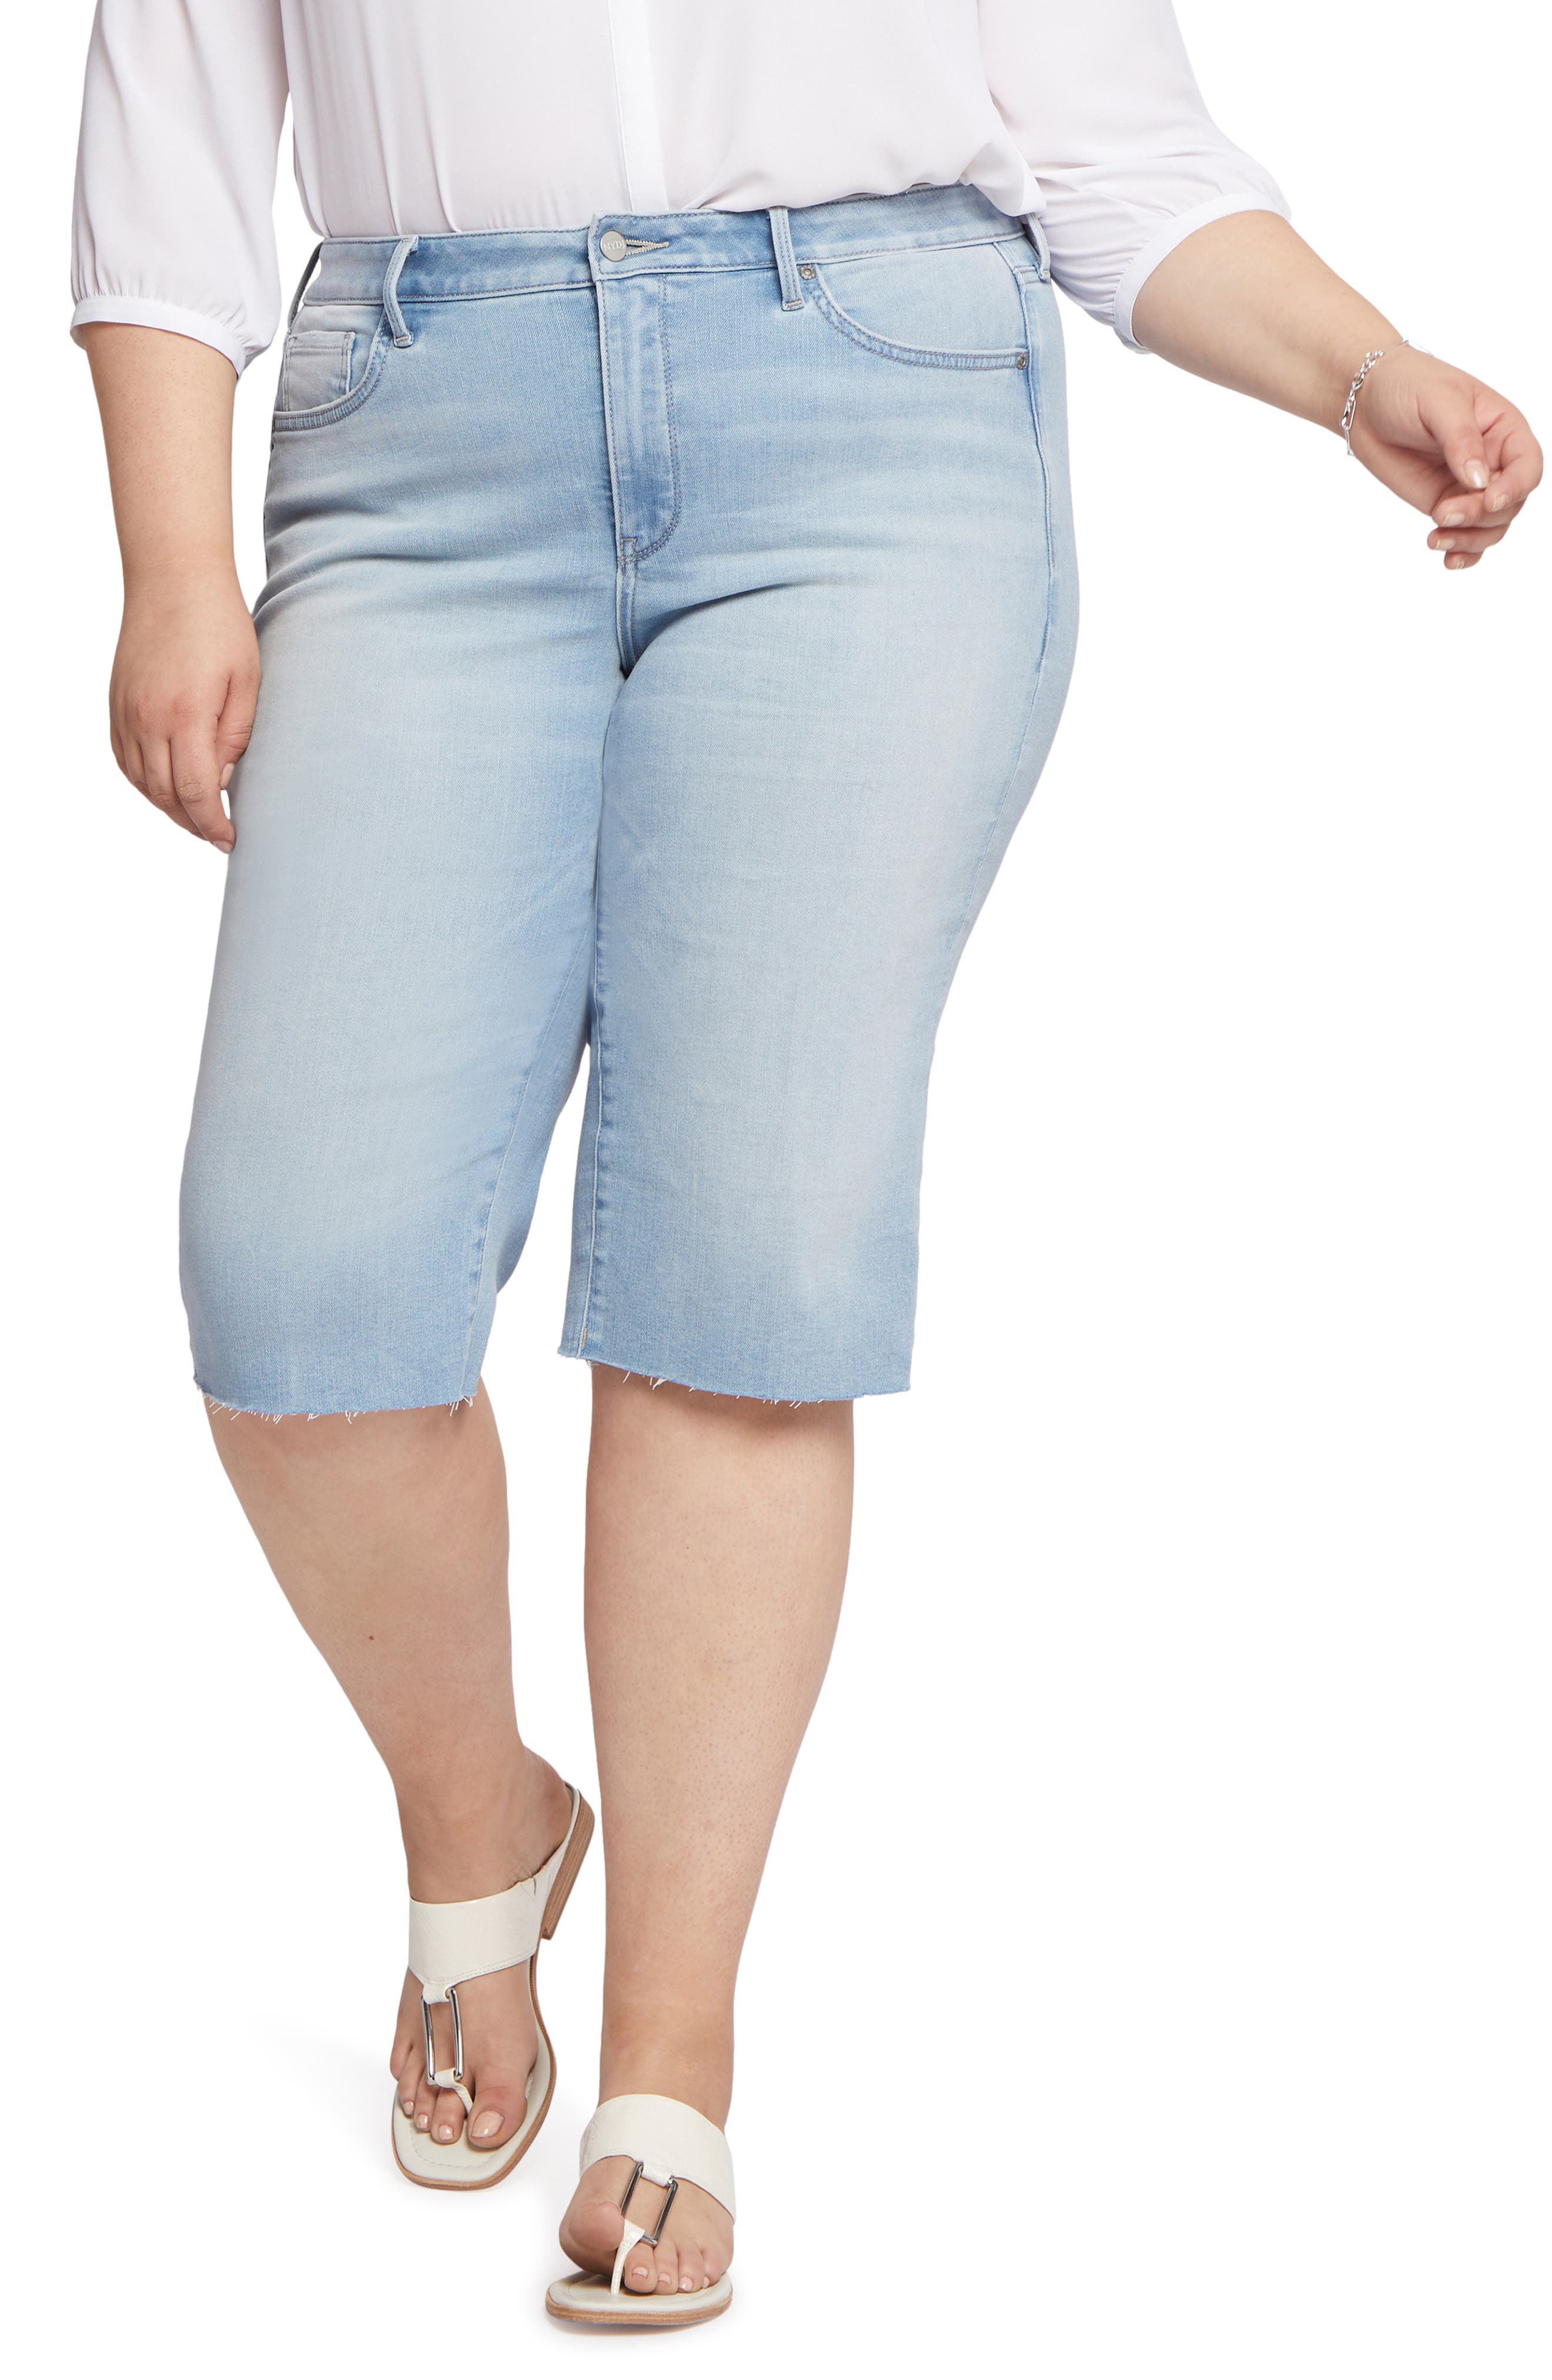 NYDJ Not Your Daughters Jeans Bermuda Shorts Cooper w/Lift Tuck Tech NWT $69 